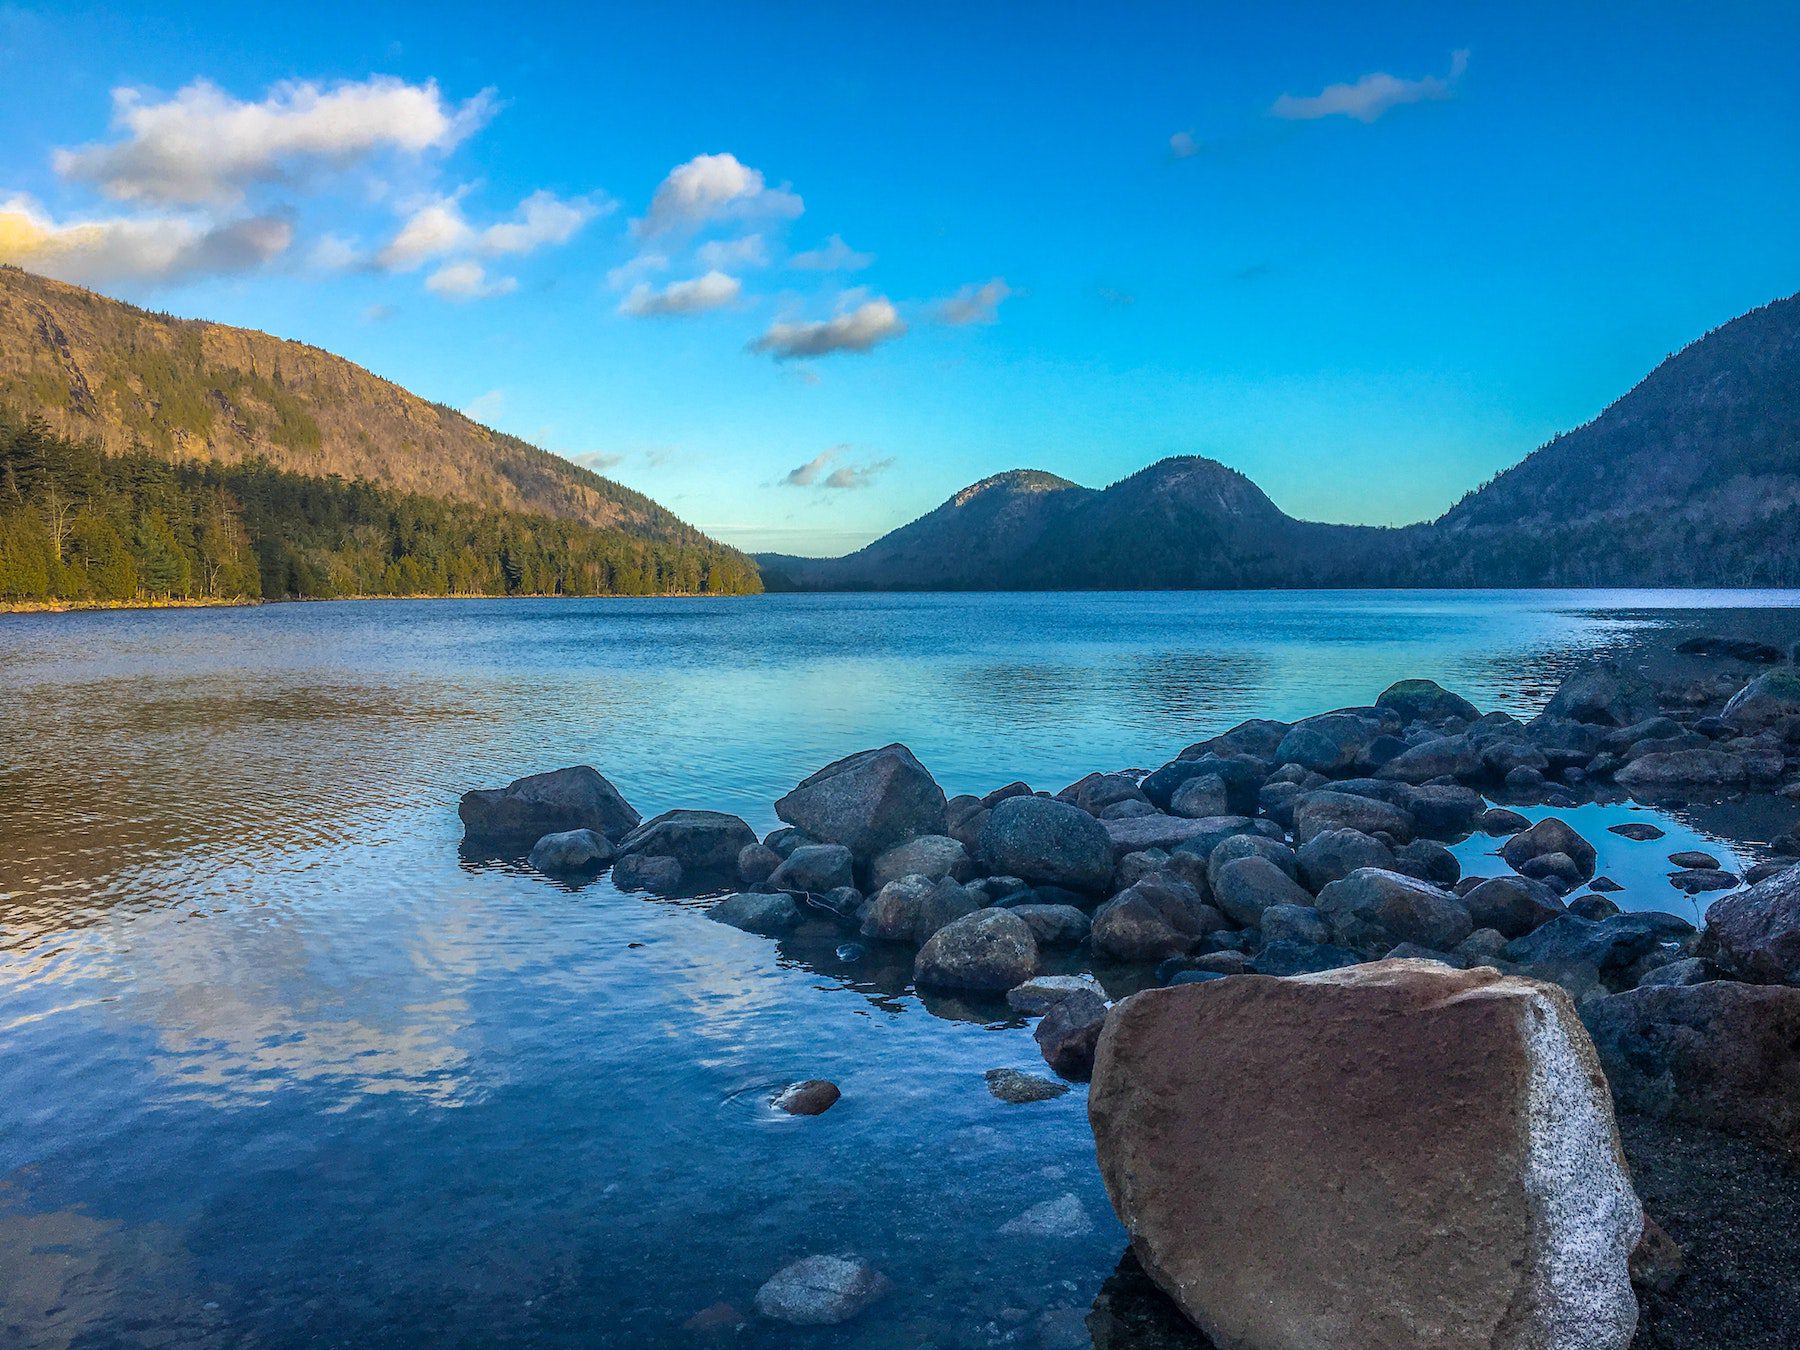 Bright blue waters of Jordan Pond at Acadia National Park with tree-lined hills surrounding the body of water.